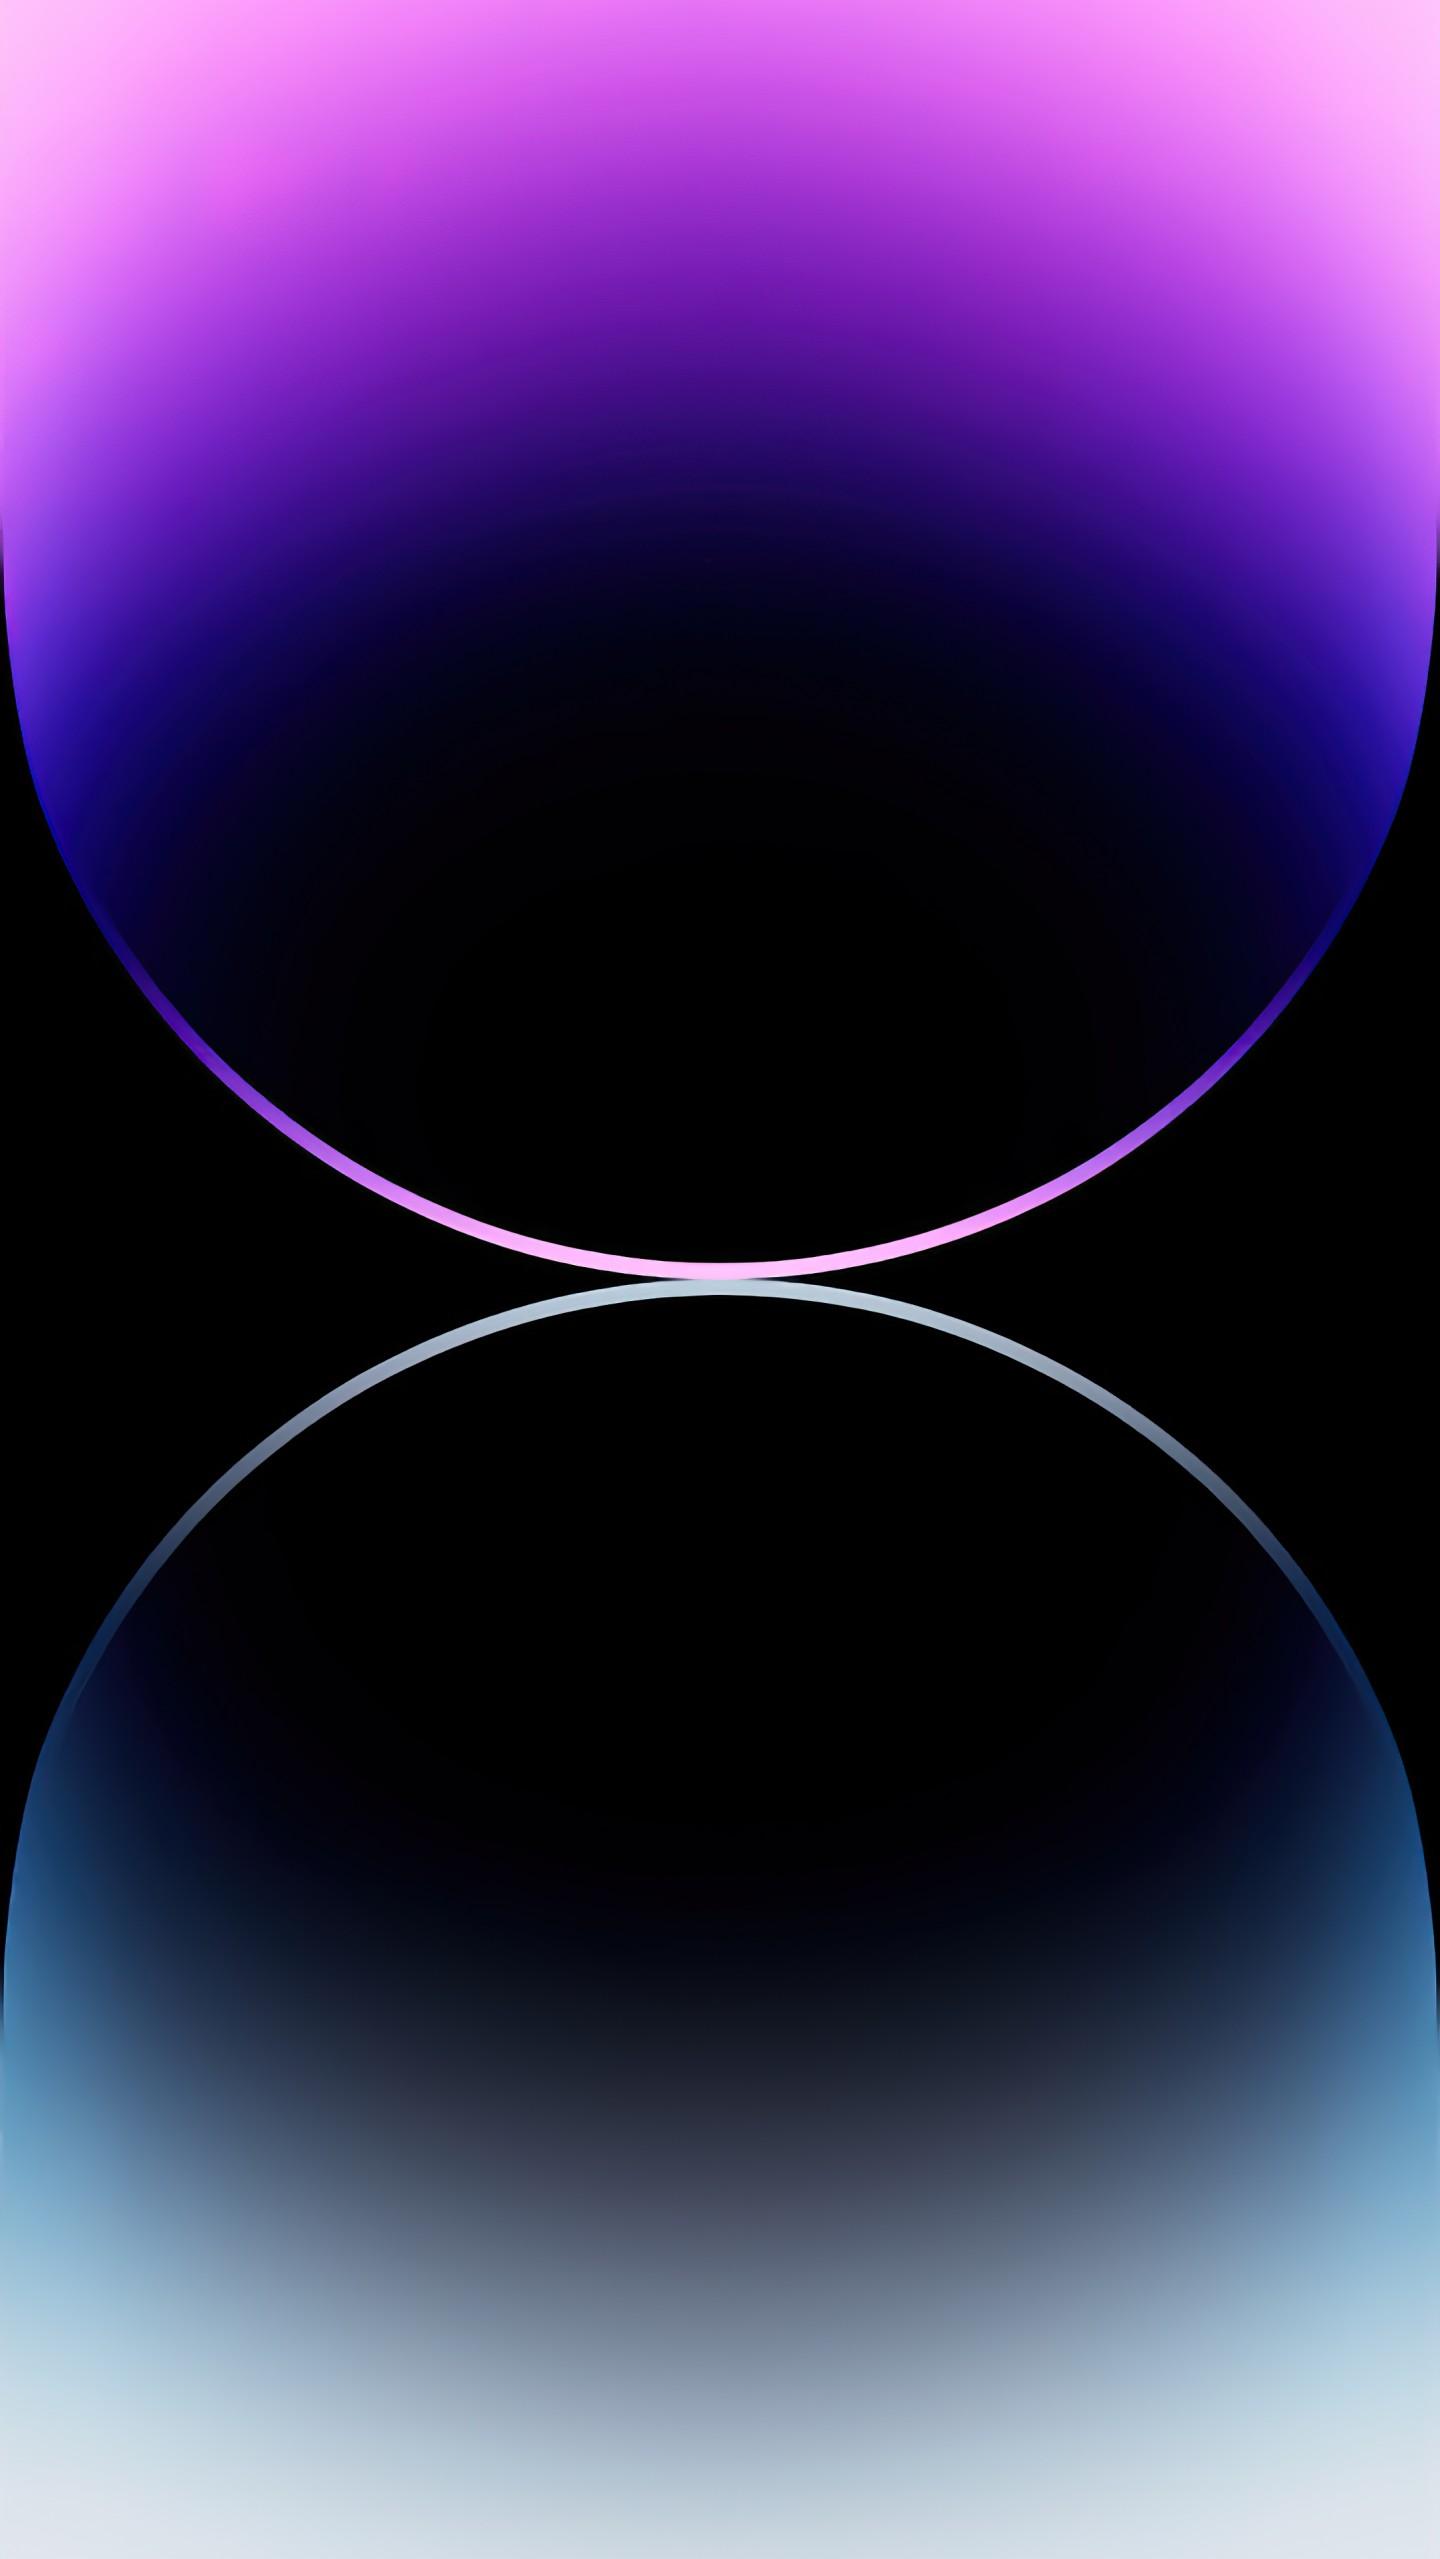 Wallpaper iPhone Pro Abstract Ios 4k Os